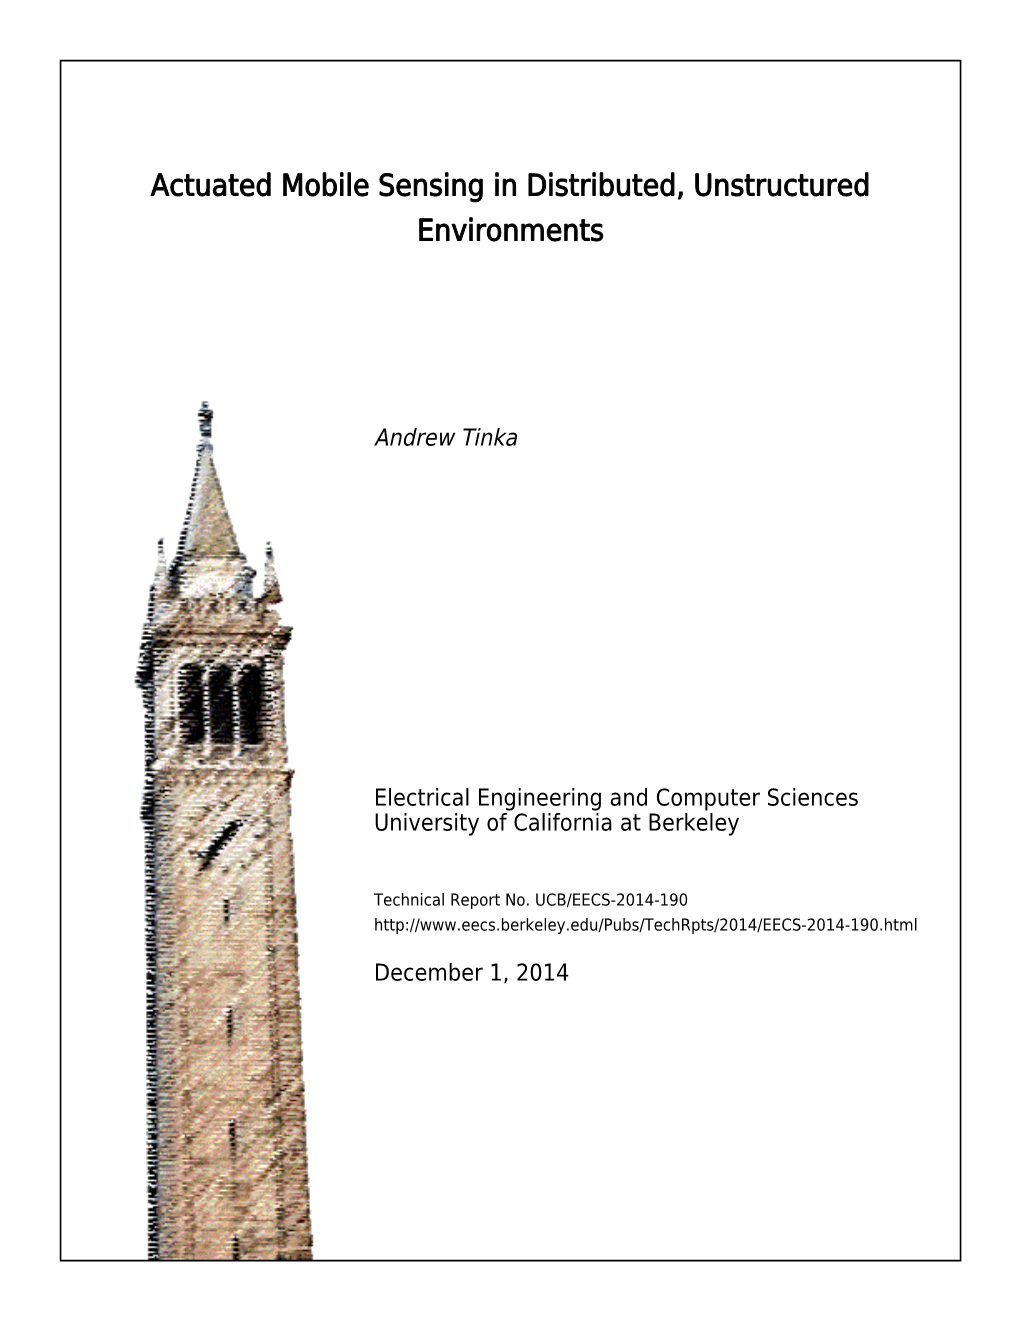 Actuated Mobile Sensing in Distributed, Unstructured Environments